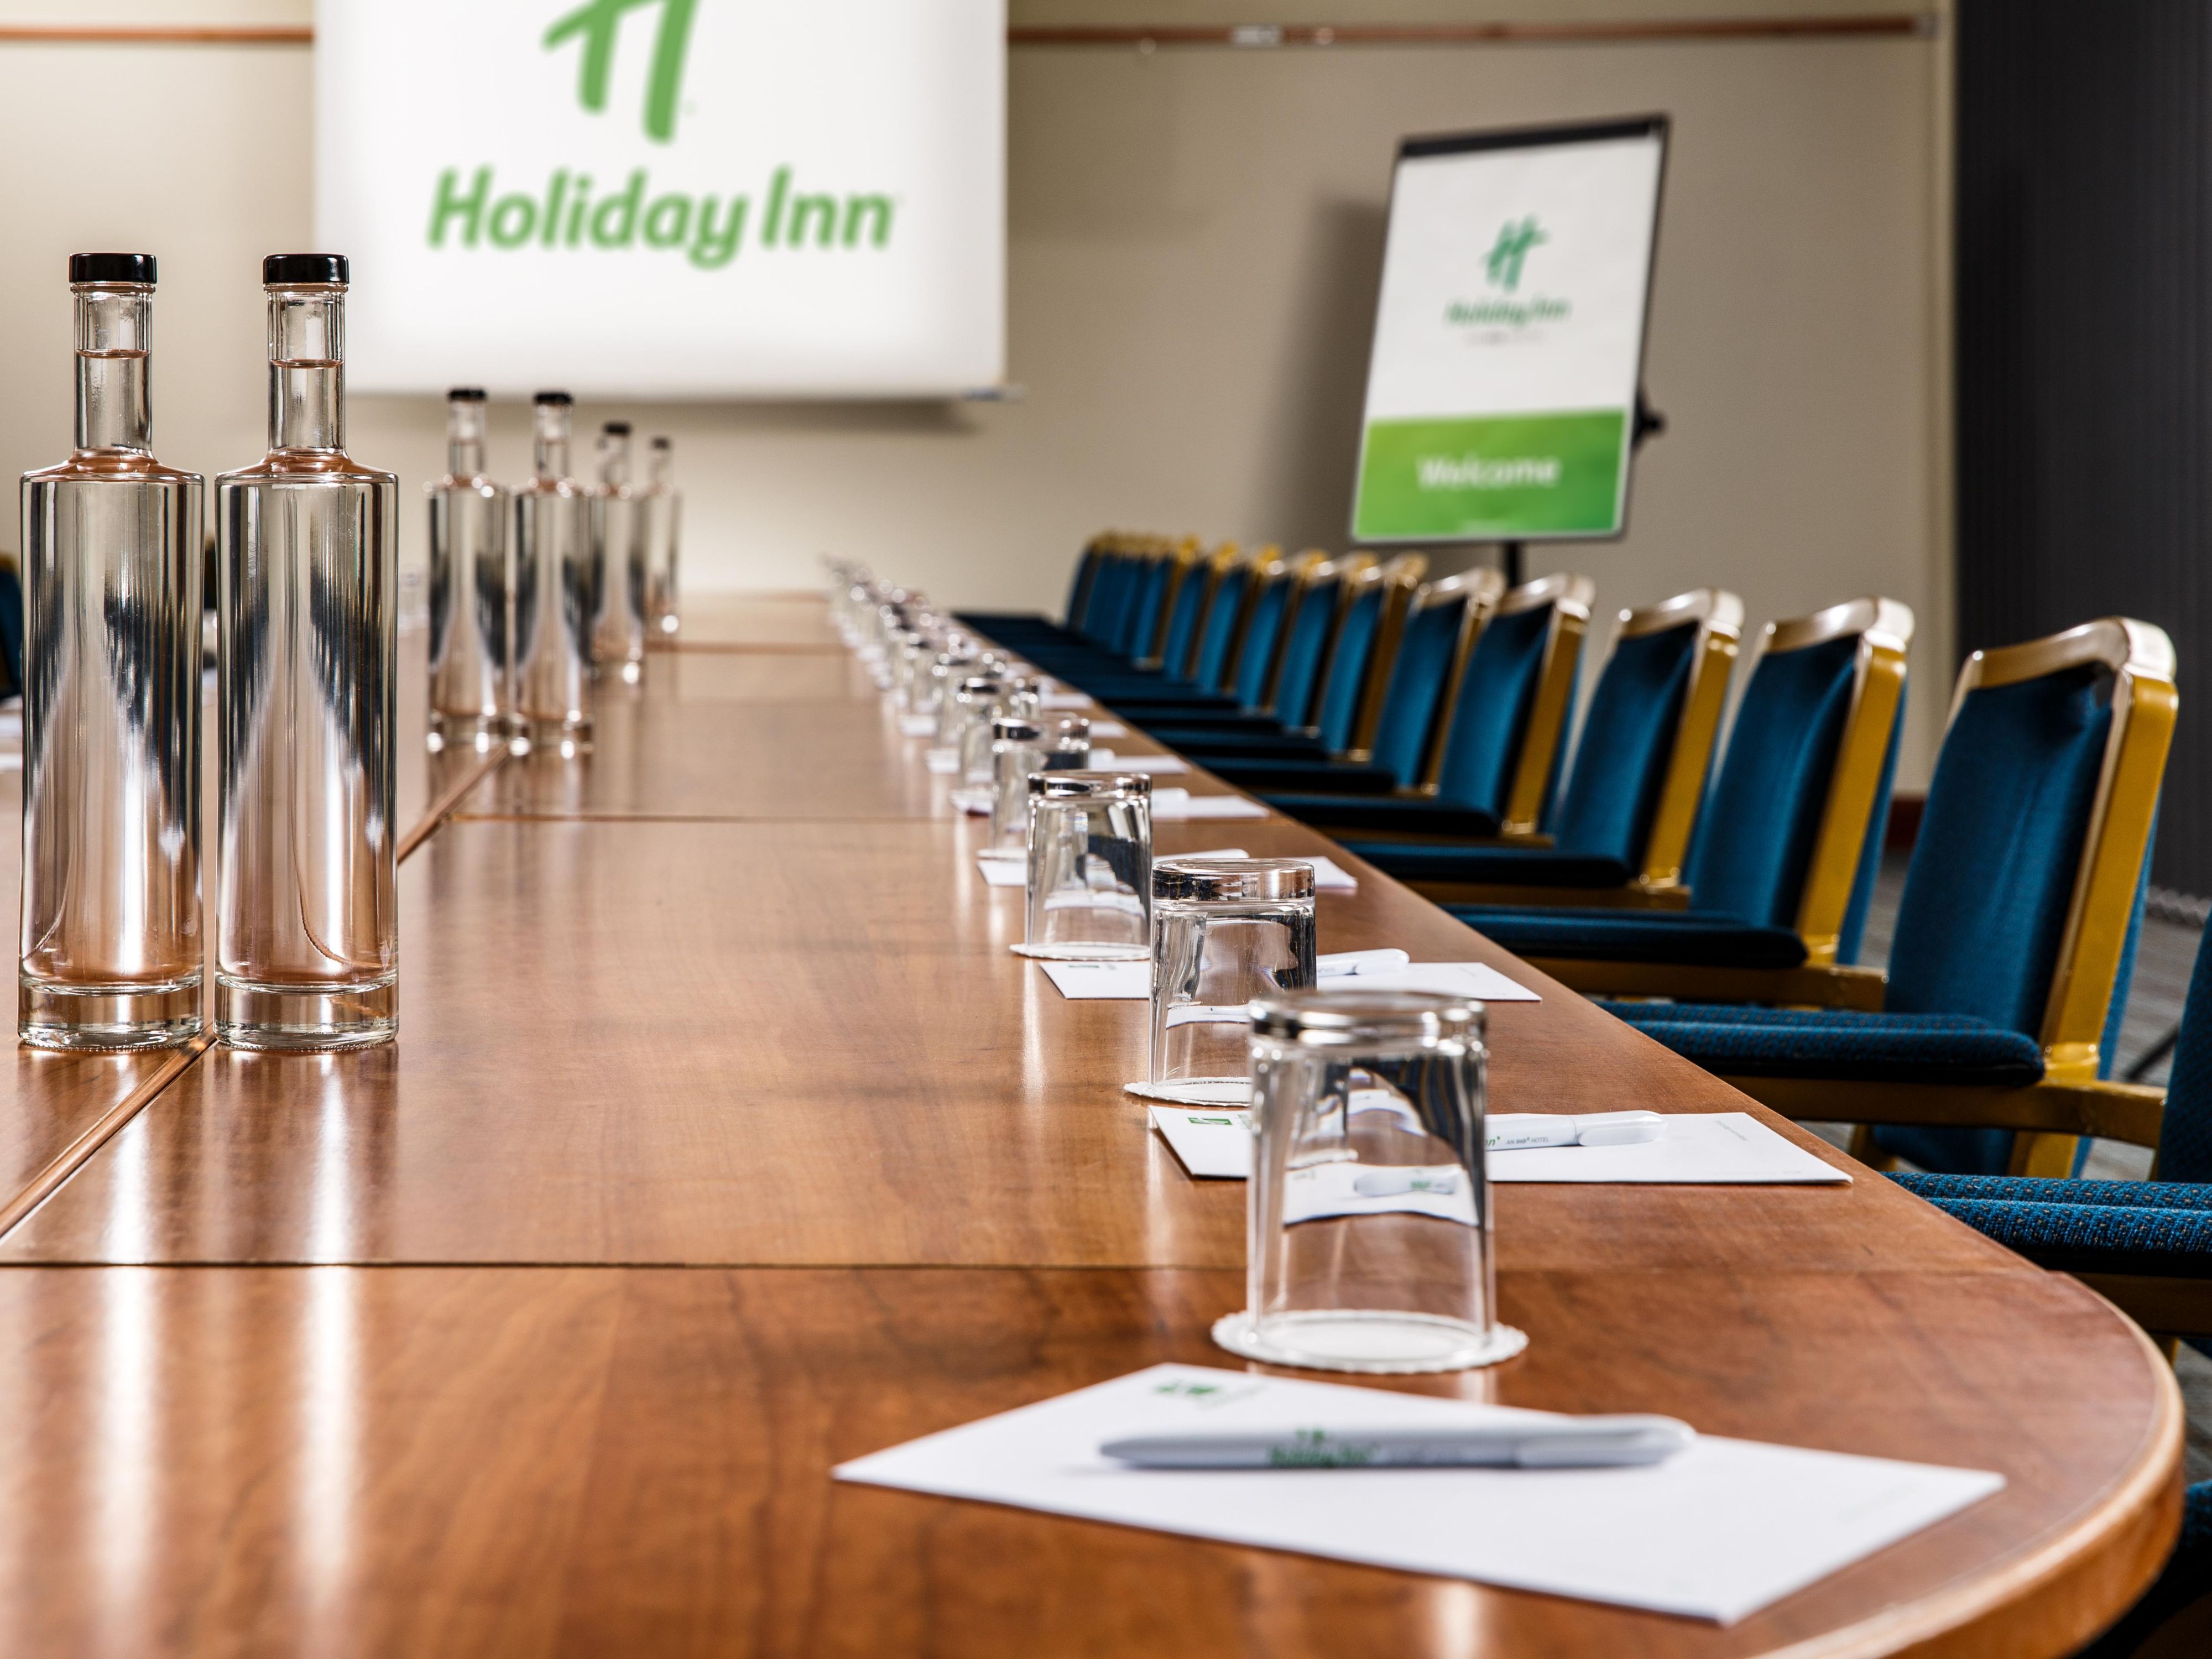 Host meetings or events for up to 120 guests in our fully equipped, versatile meeting rooms and use our garden patio for outdoor space in summer. Our dedicated team are on hand to support with both planning and delivery of your event.